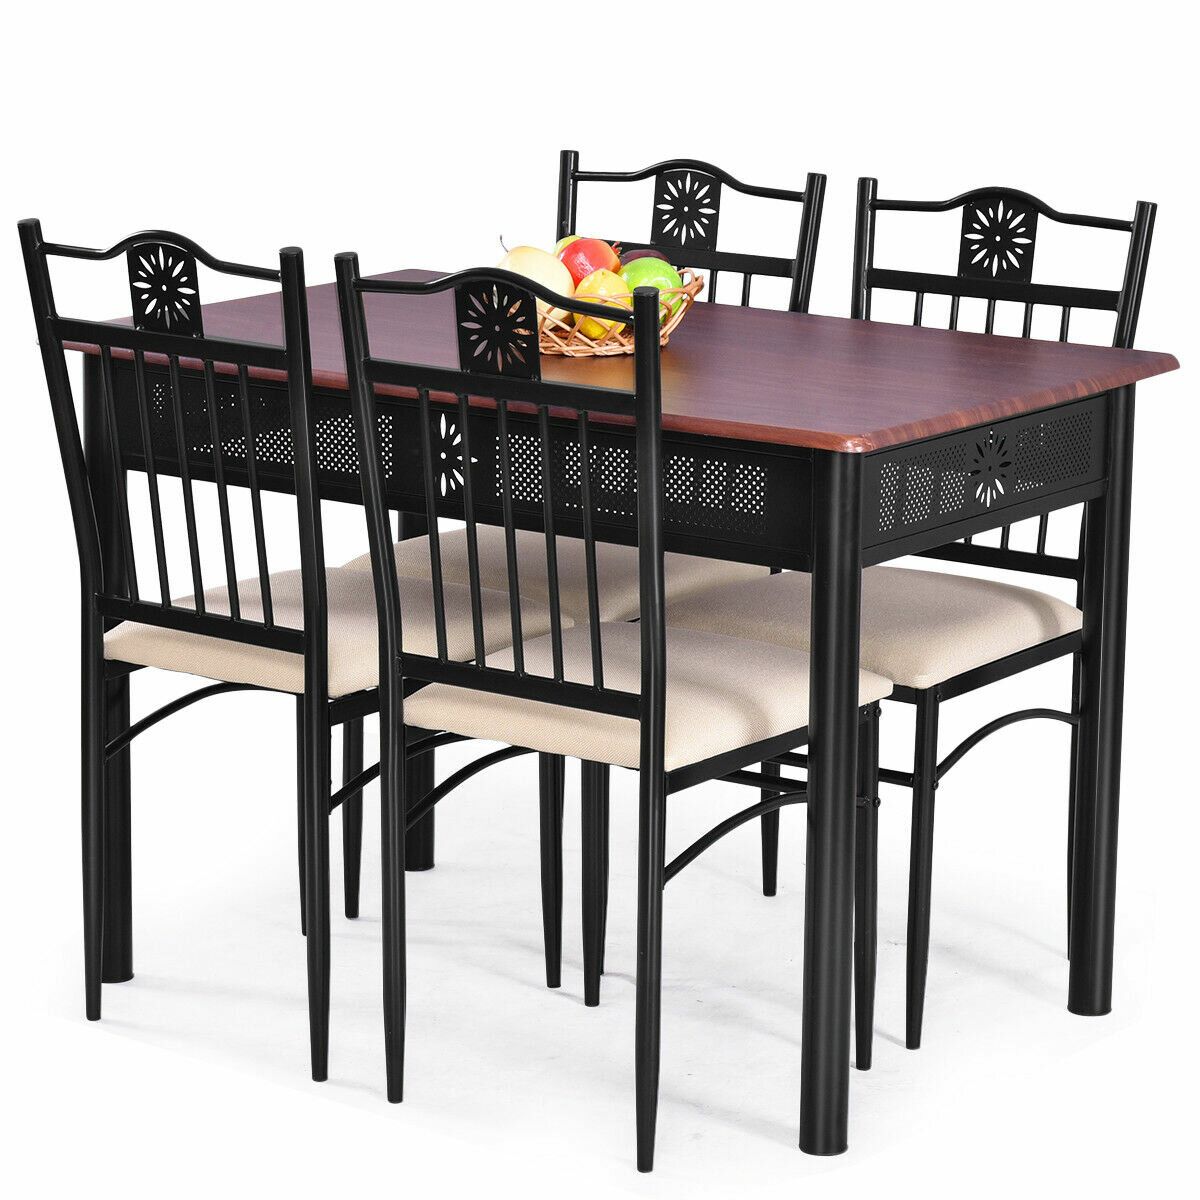 Ganya 5 Piece Dining Set Within Most Current Miskell 5 Piece Dining Sets (View 4 of 20)